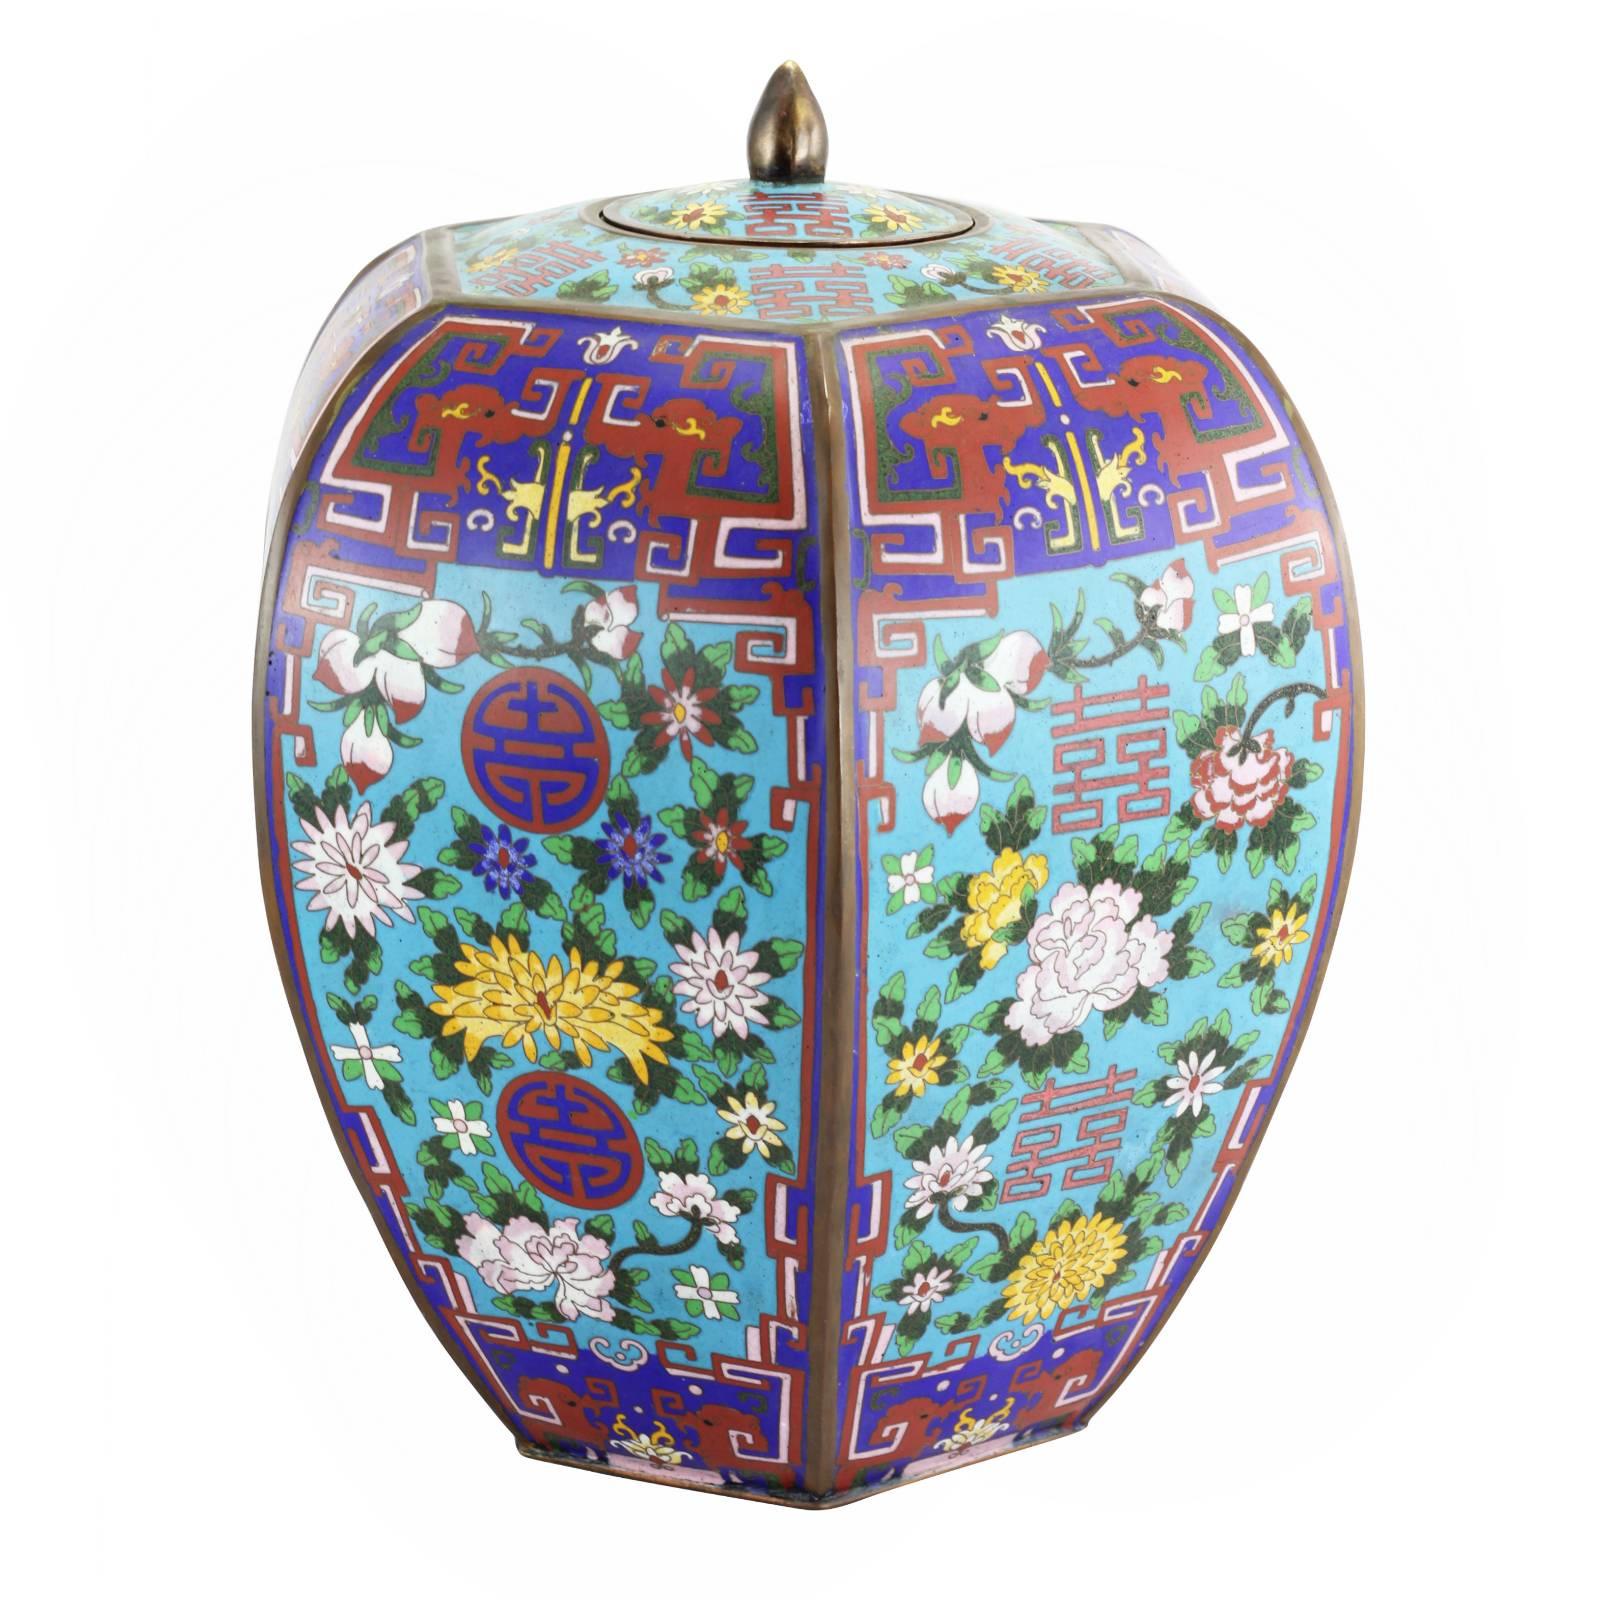 A pair of Chinese enamel lidded jars, dating to the mid-20th century, decorated with a cloisonne floral motif.

Cloisonne is an ancient technique used to decorate metalwork with inlays of enamel, which is exhibited in this colorful expression of